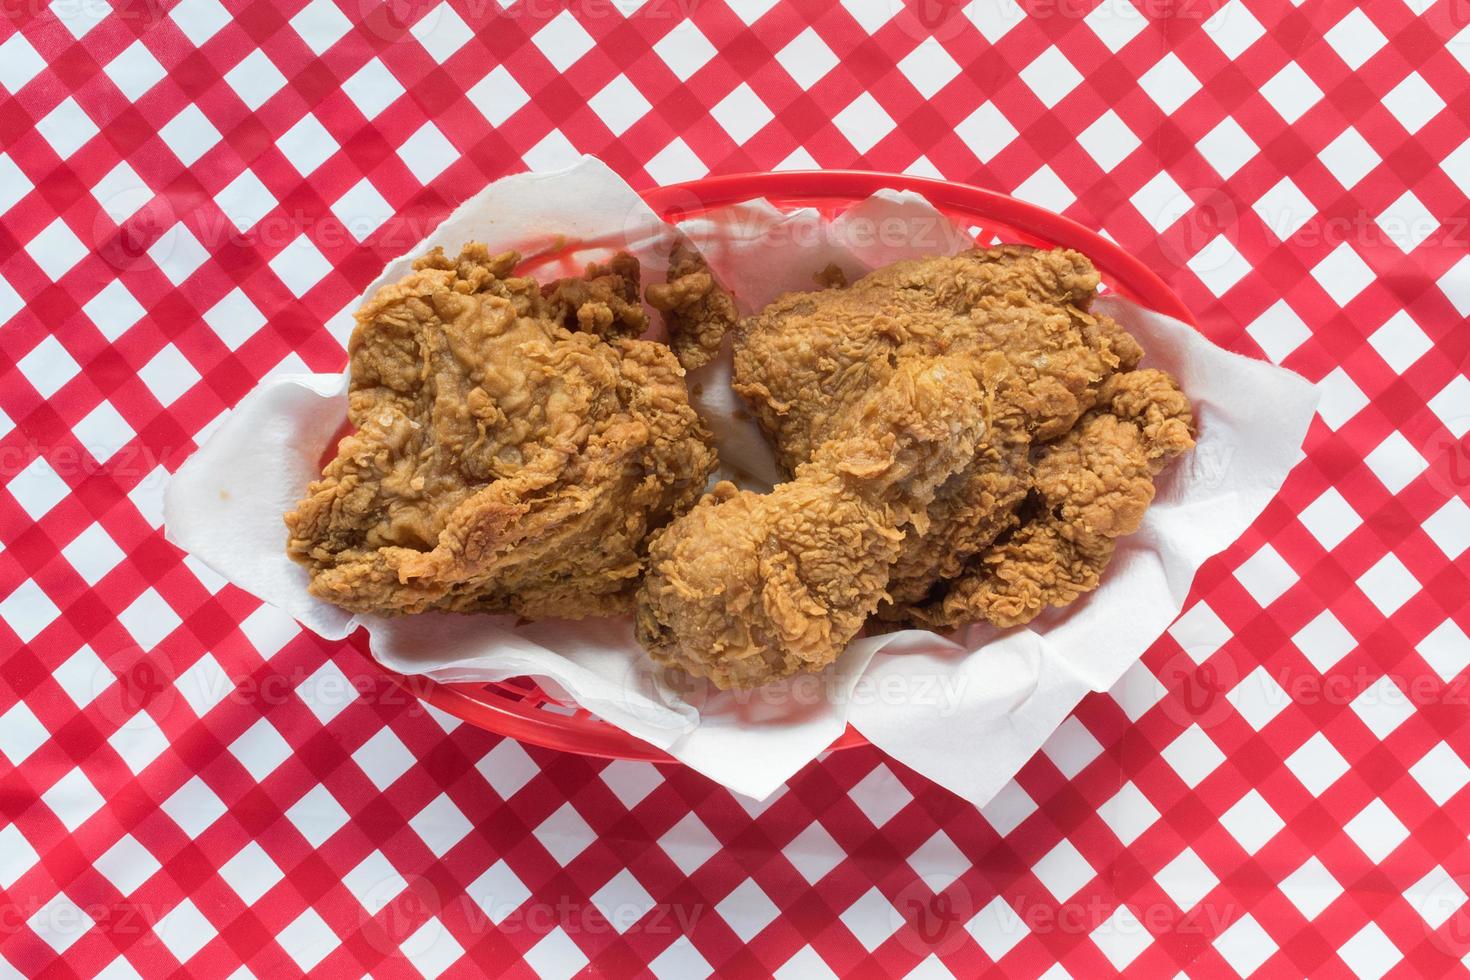 Fried chicken basket on red checkerboard tablecloth flat lay photo